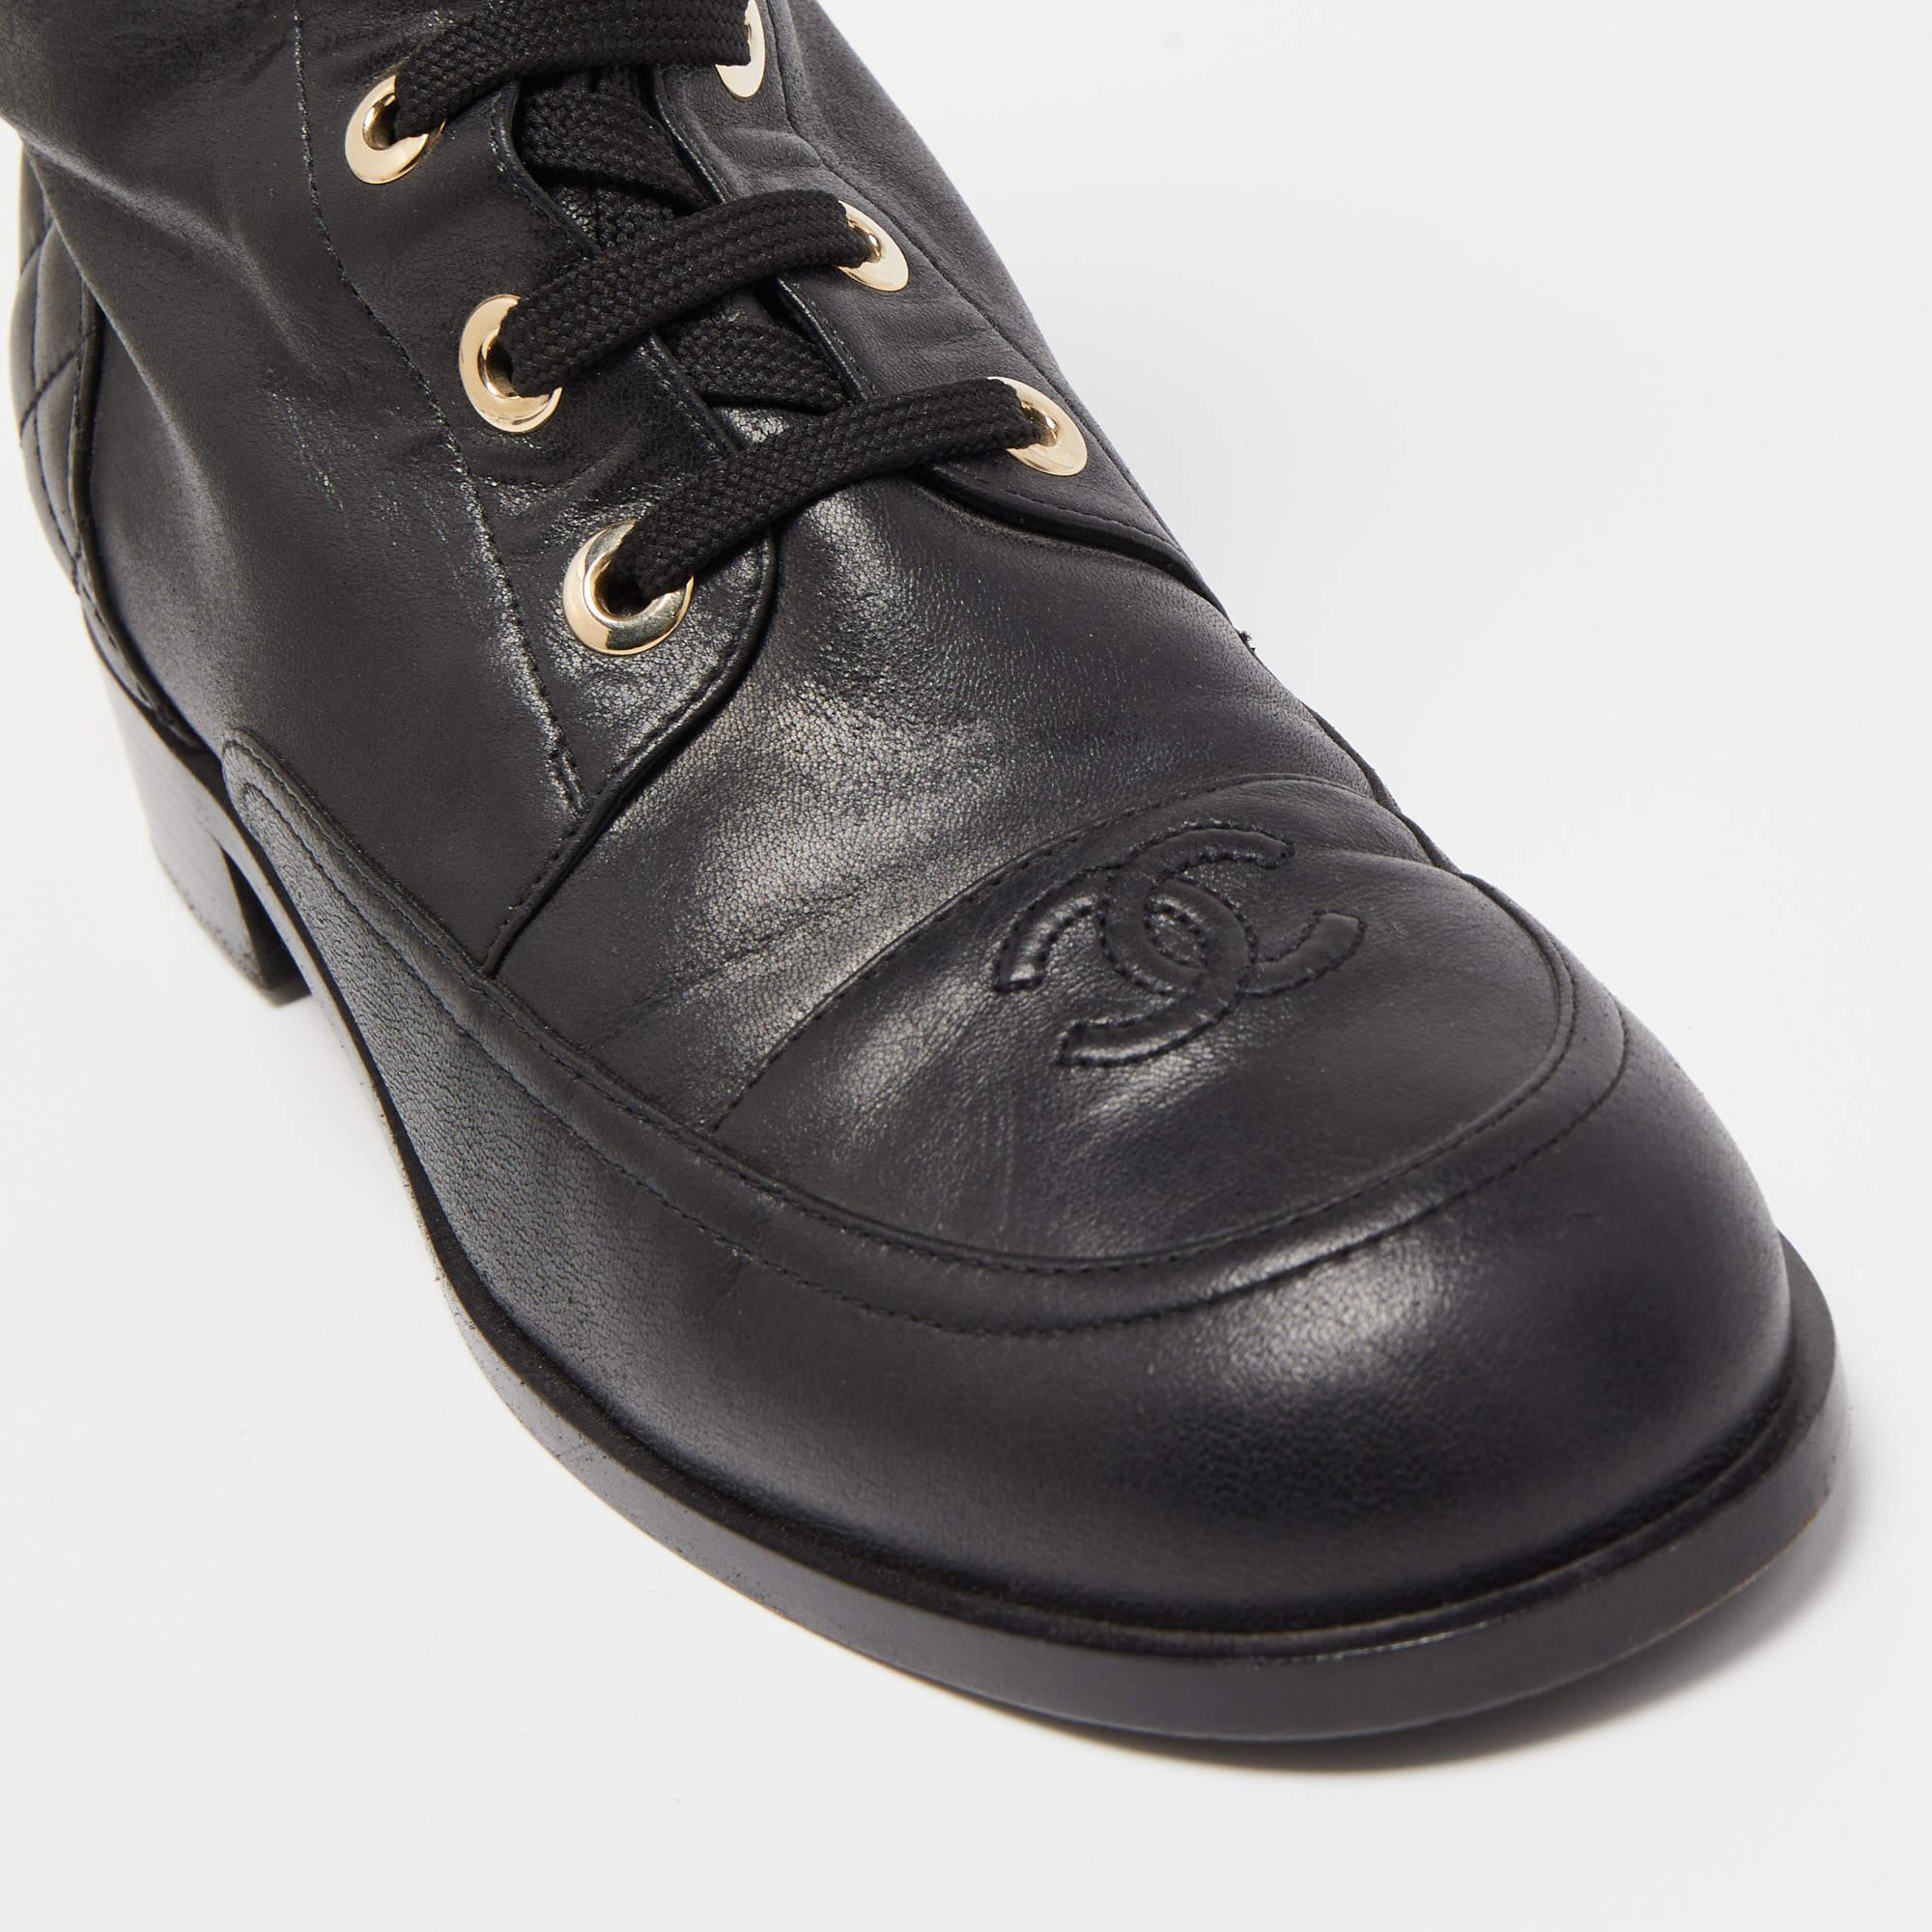 Complete a smart outfit with these black combat boots from Chanel. They're fashioned in leather and secured with simple lace-ups on the uppers.

